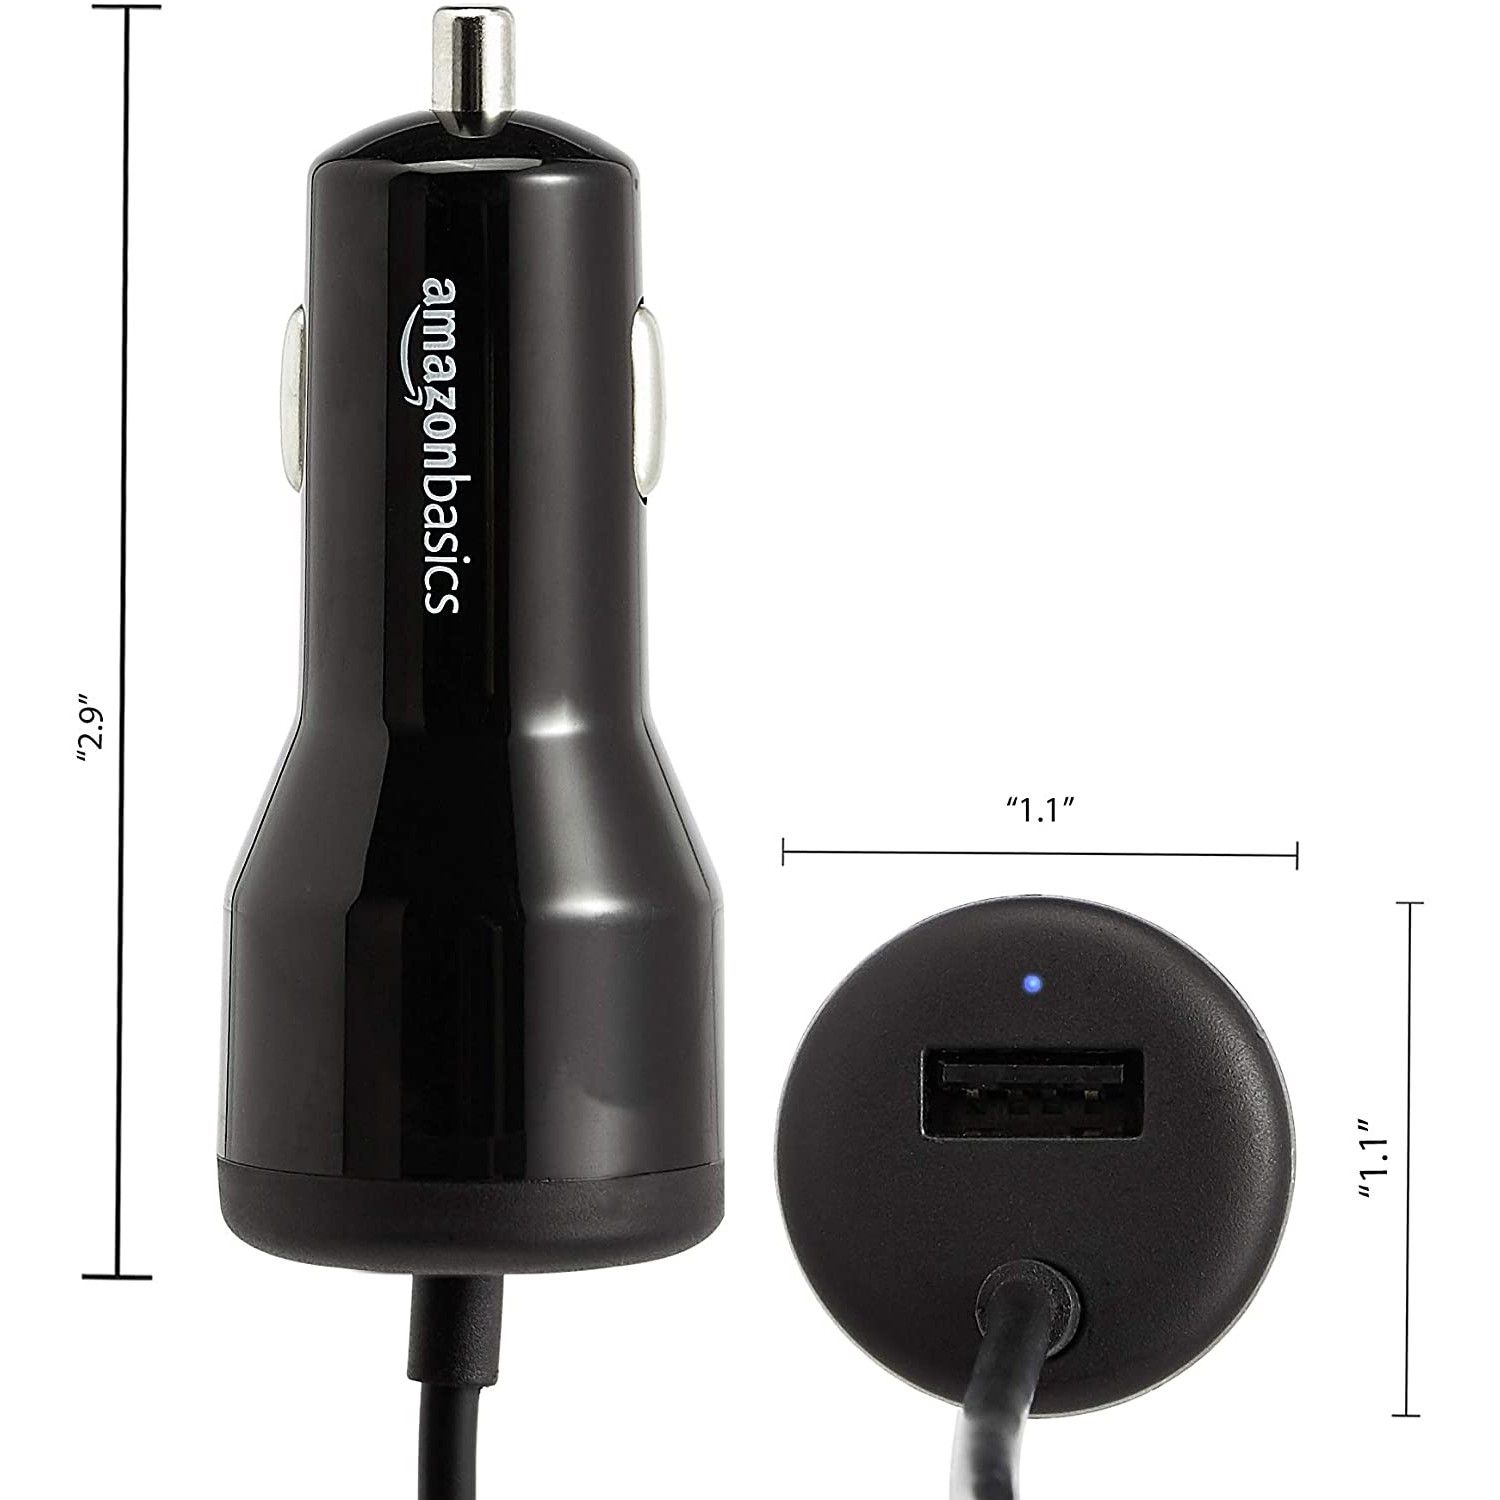 The dimensions of the Amazon Basics USB-C Car Charger